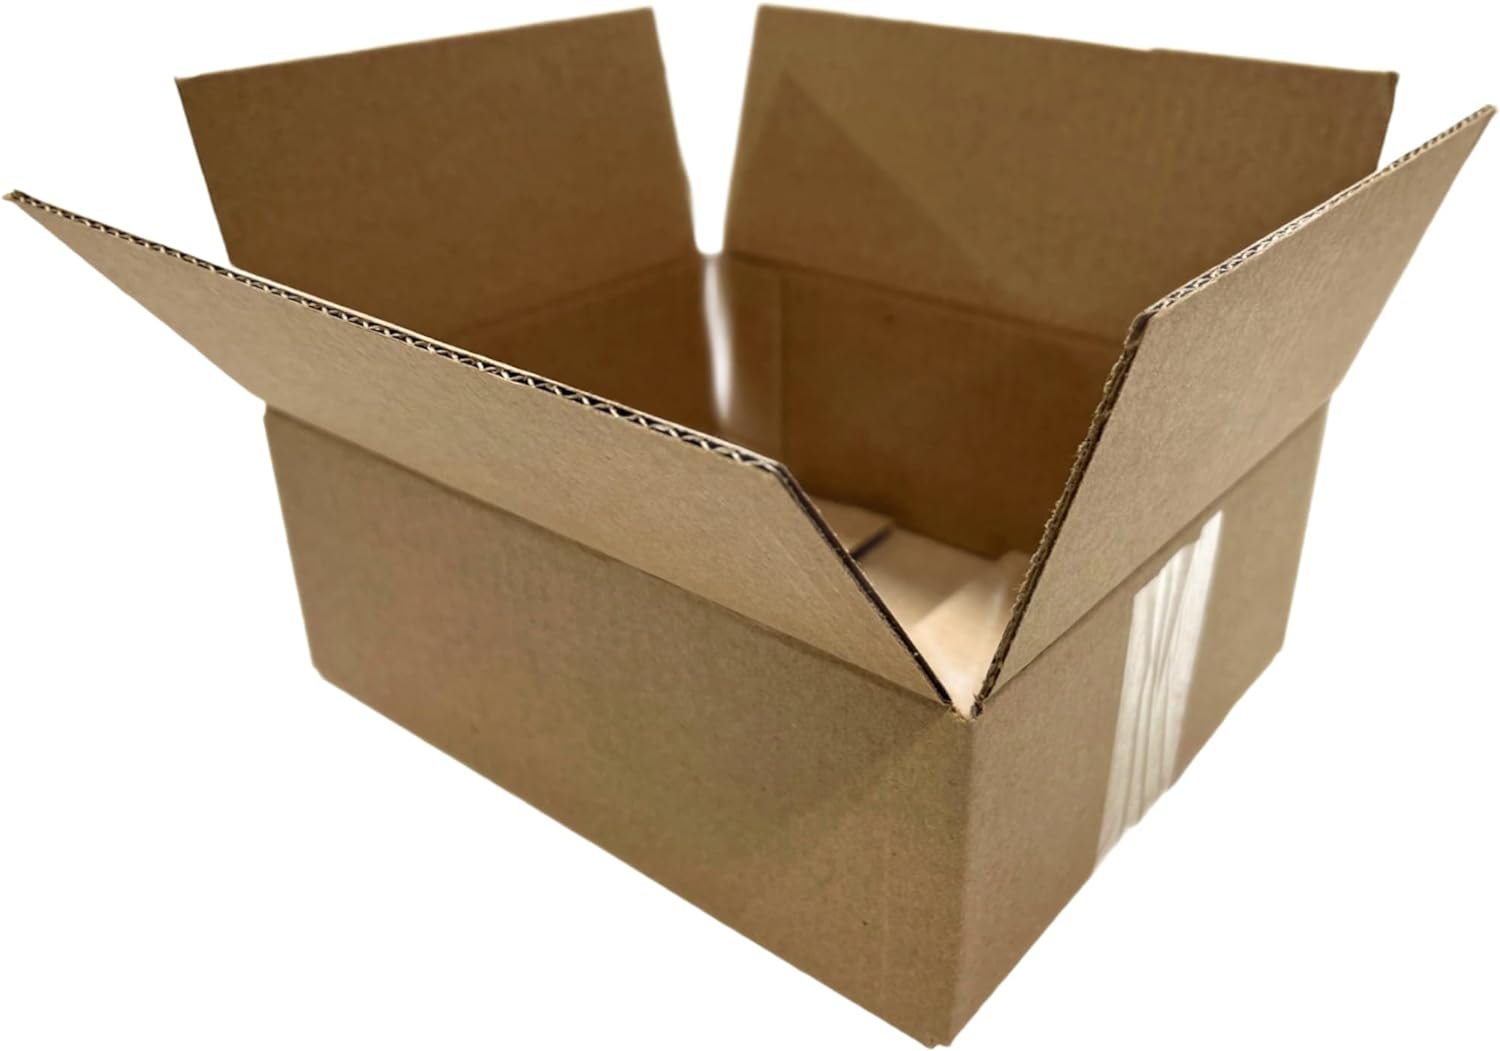 100 5x3x2 Cardboard Paper Boxes Mailing Packing Shipping Box Corrugated Carton